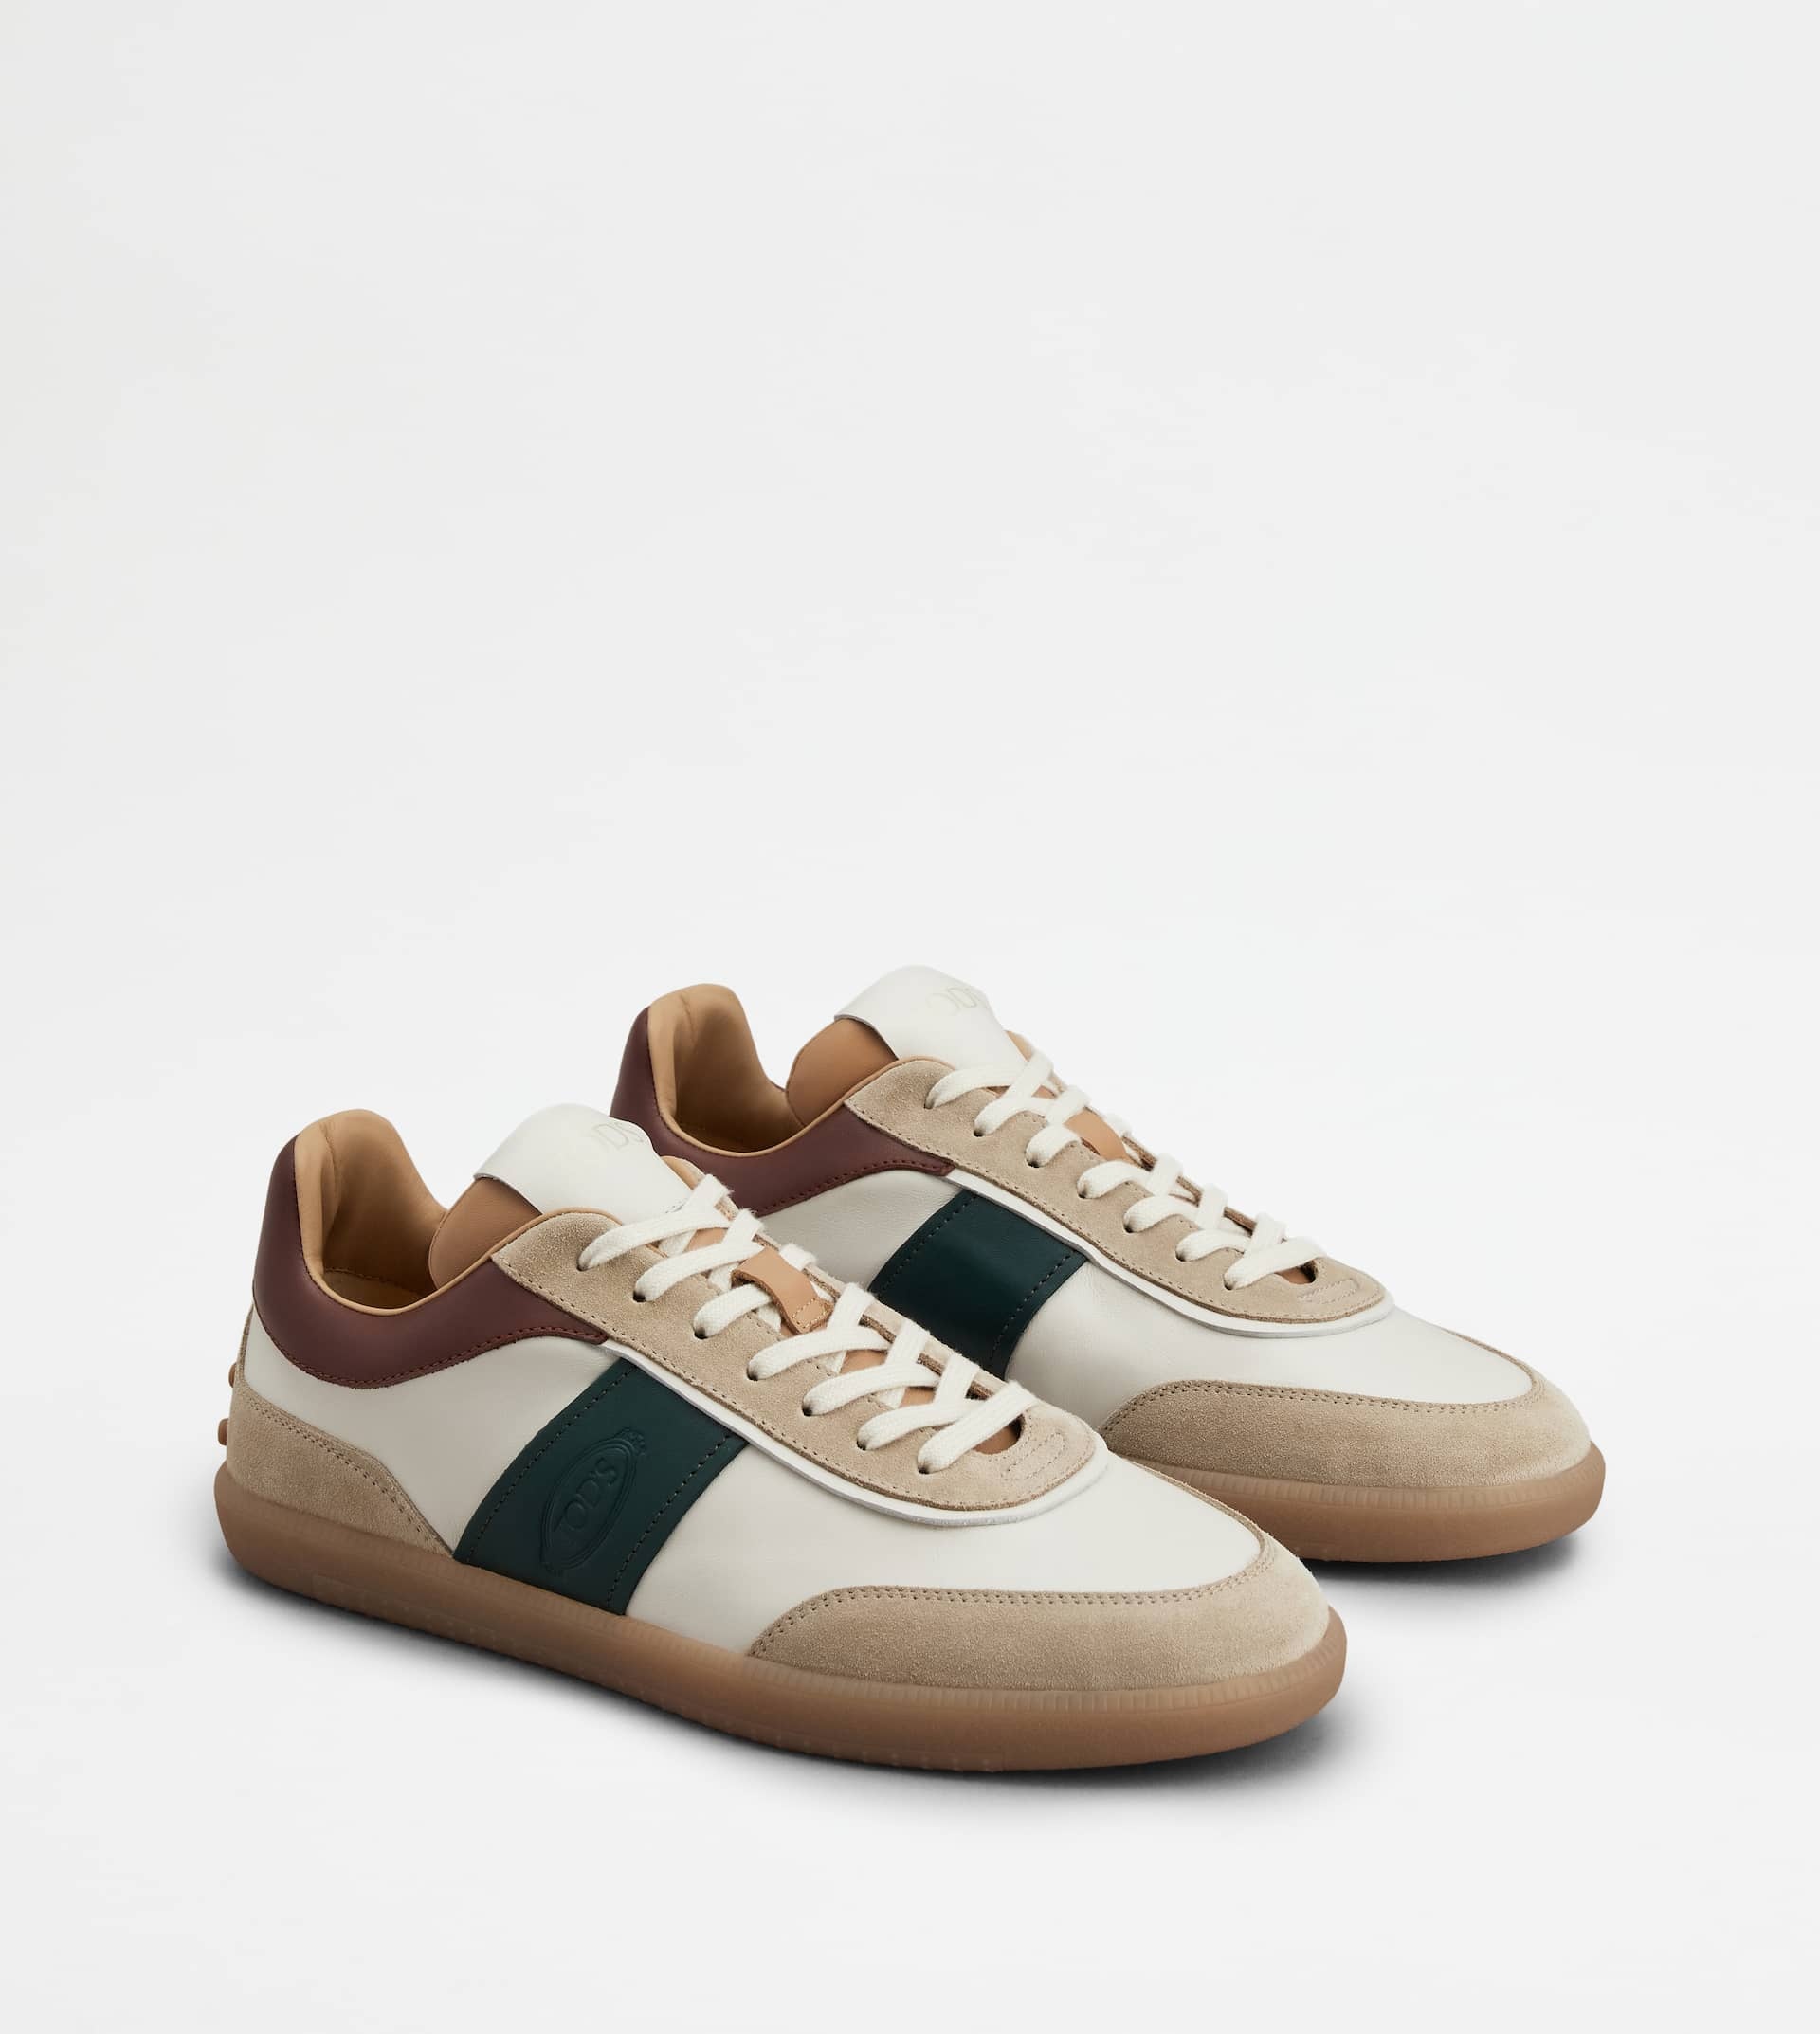 TOD'S TABS SNEAKERS IN SUEDE - OFF WHITE, BROWN, GREEN - 4